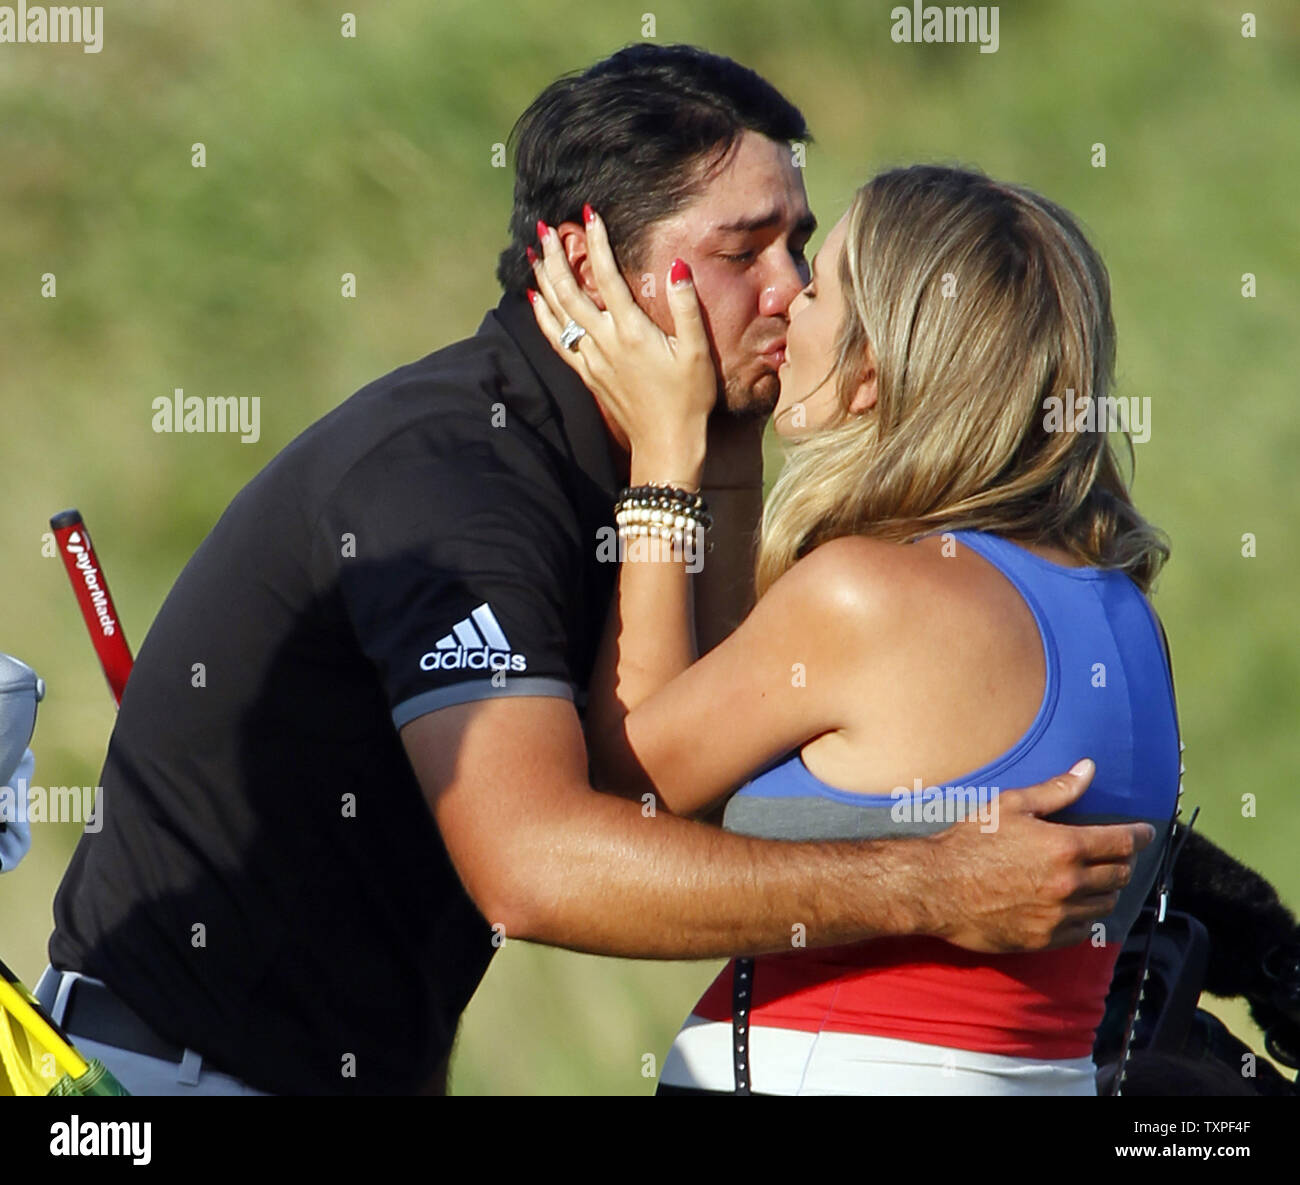 Jason Day, of Australia, kisses wife Ellie, after shooting a 20-under-par 268 to win the 97th PGA Championship at Whistling Straits on August 16, 2015 in Kohler, Wisconsin